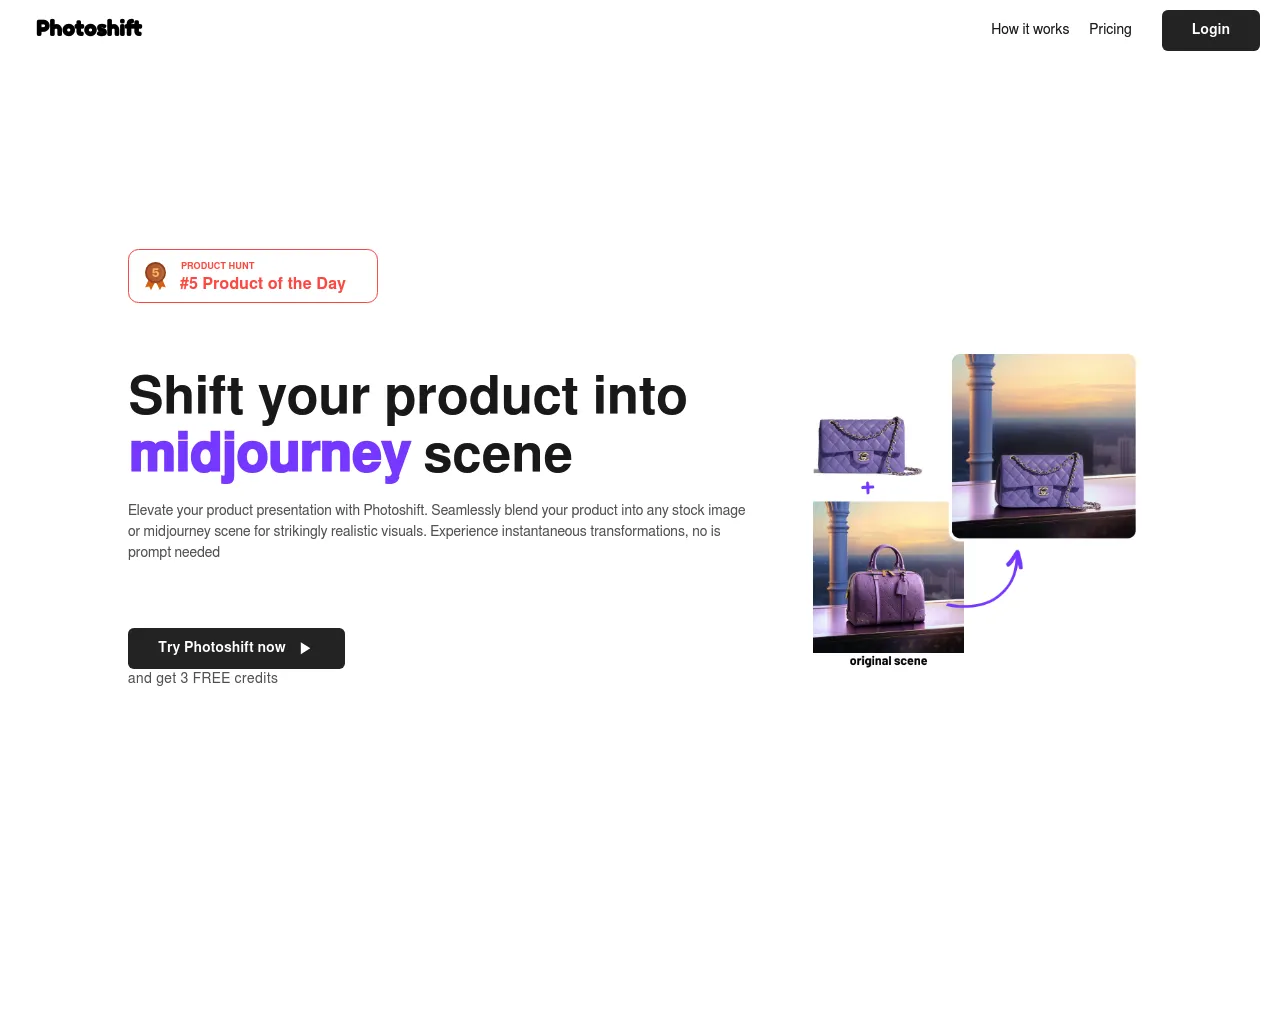 Shift your product into midjourney scene, or any stock photo